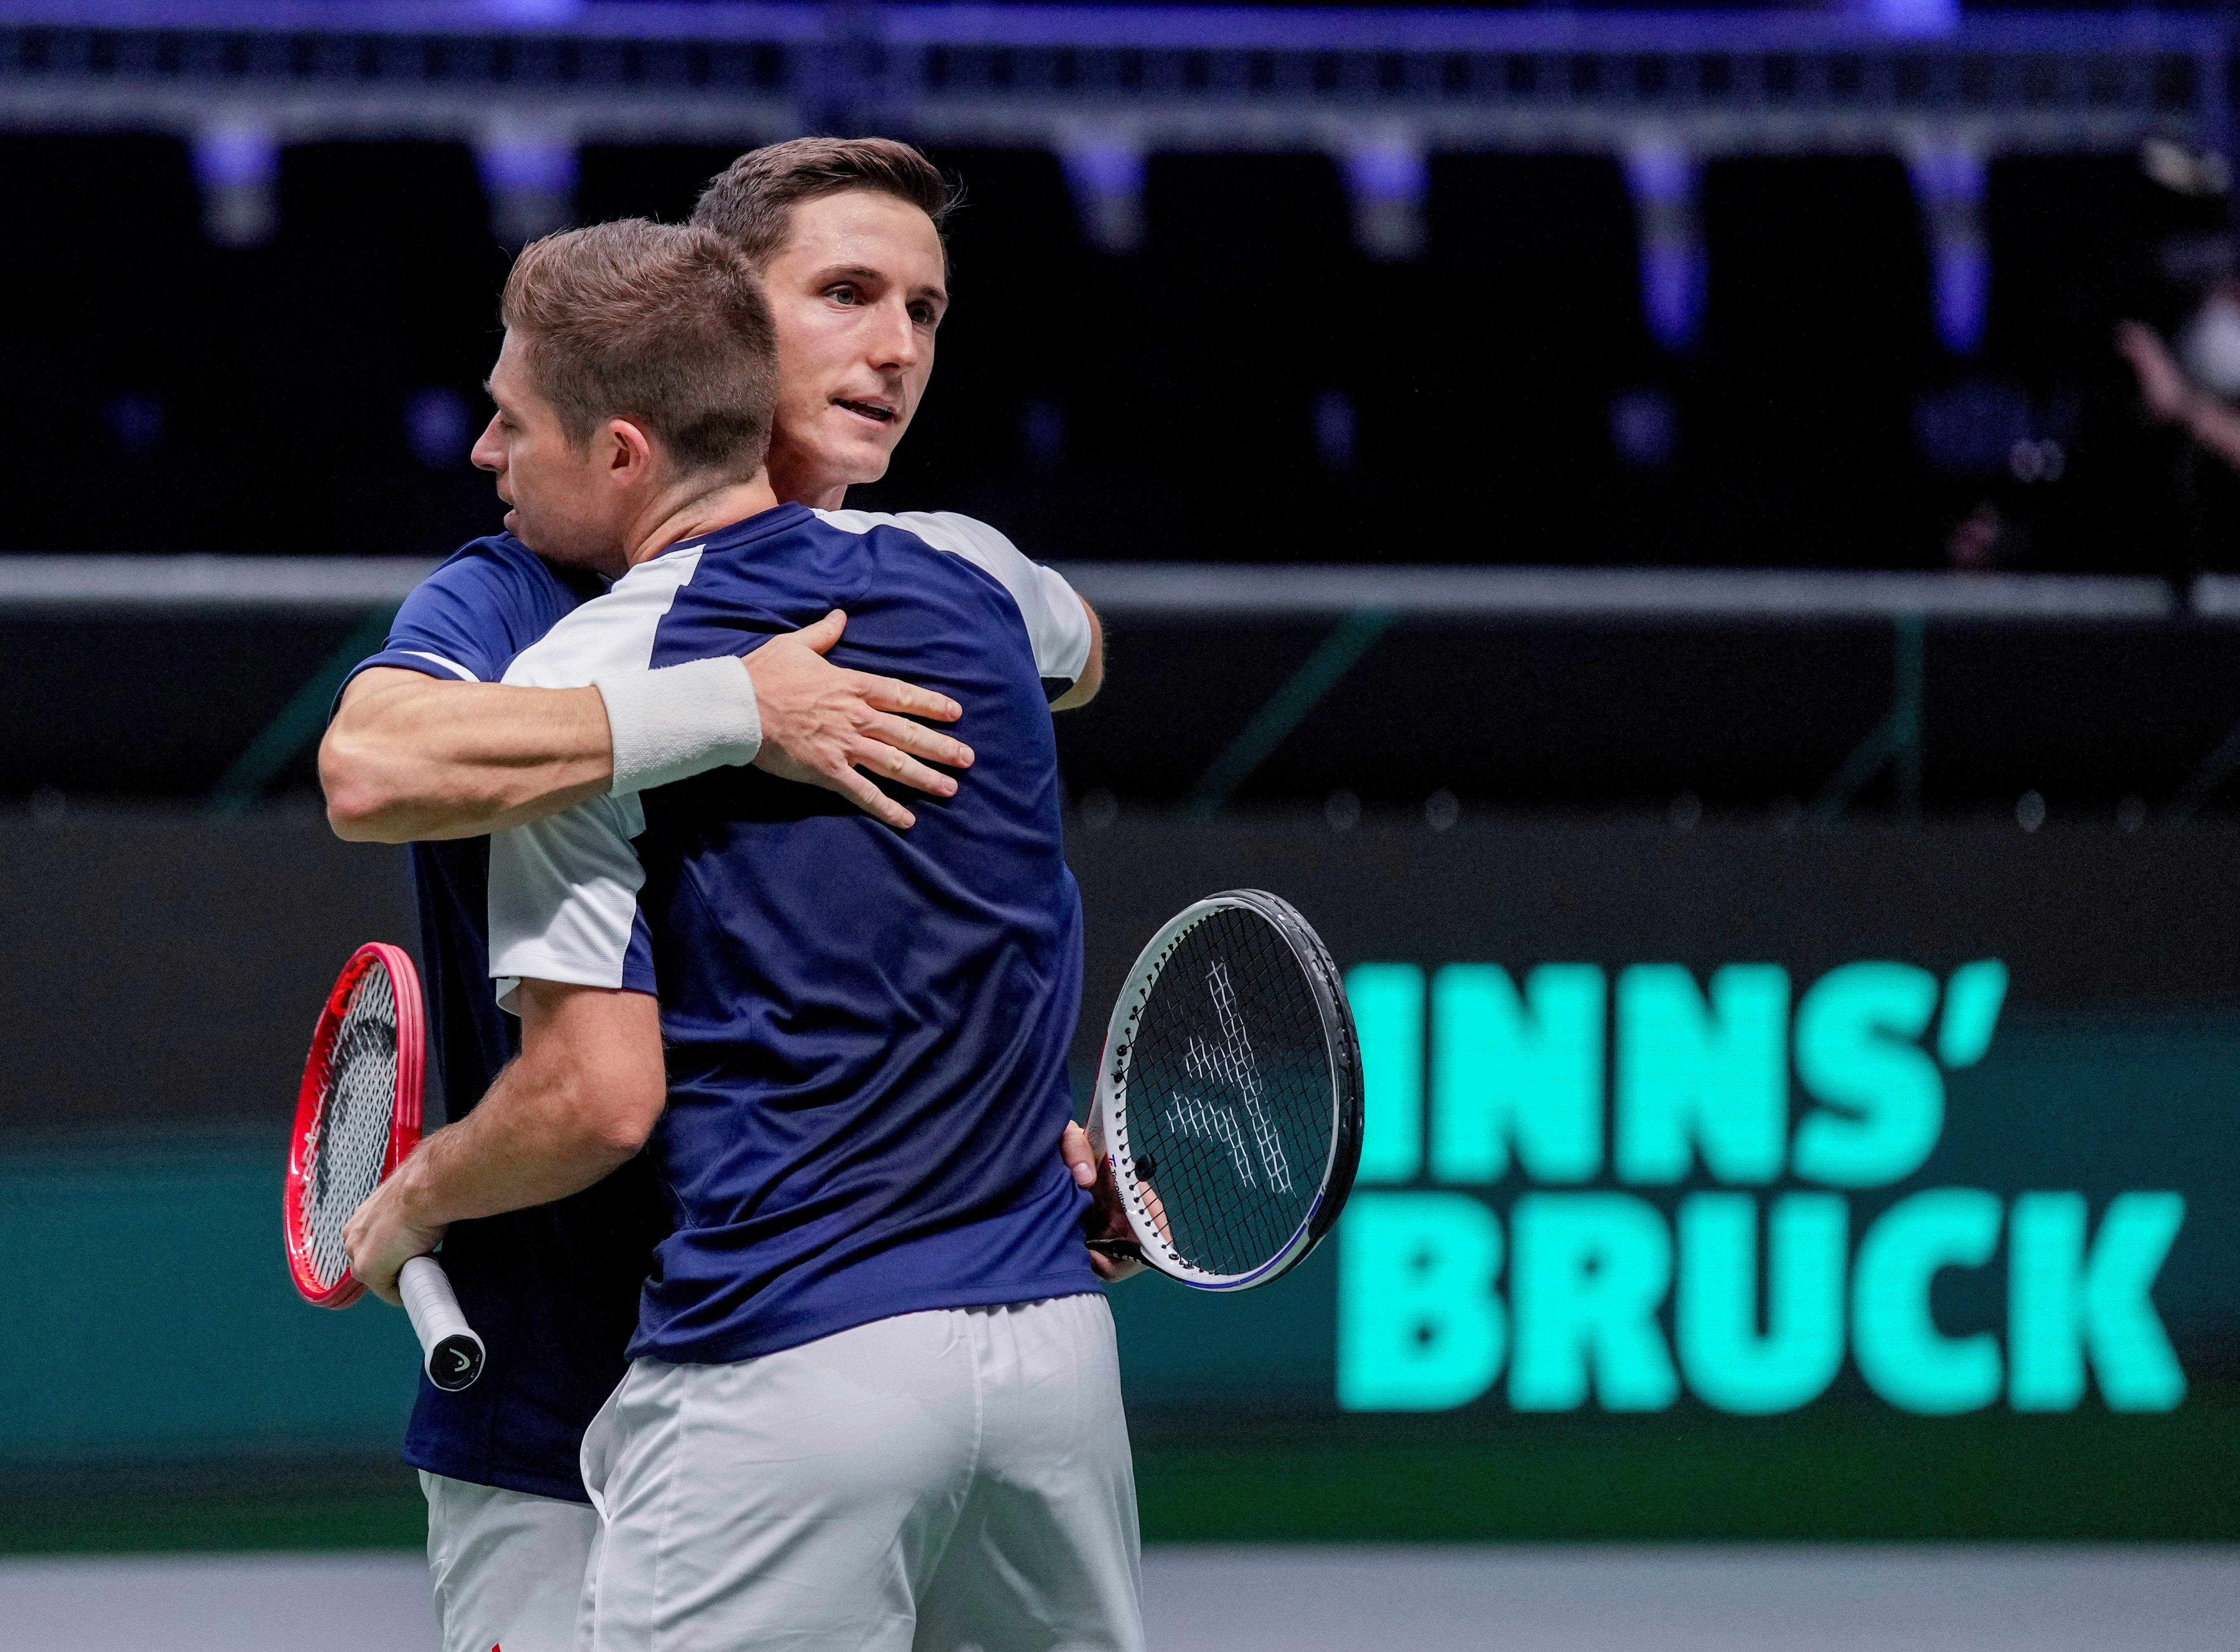 Joe Salisbury (right) and Neal Skupski helped Great Britain to defeat the Czech Republic and reach the quarter-finals of the Davis Cup in Innsbruck (Michael Probst/AP)